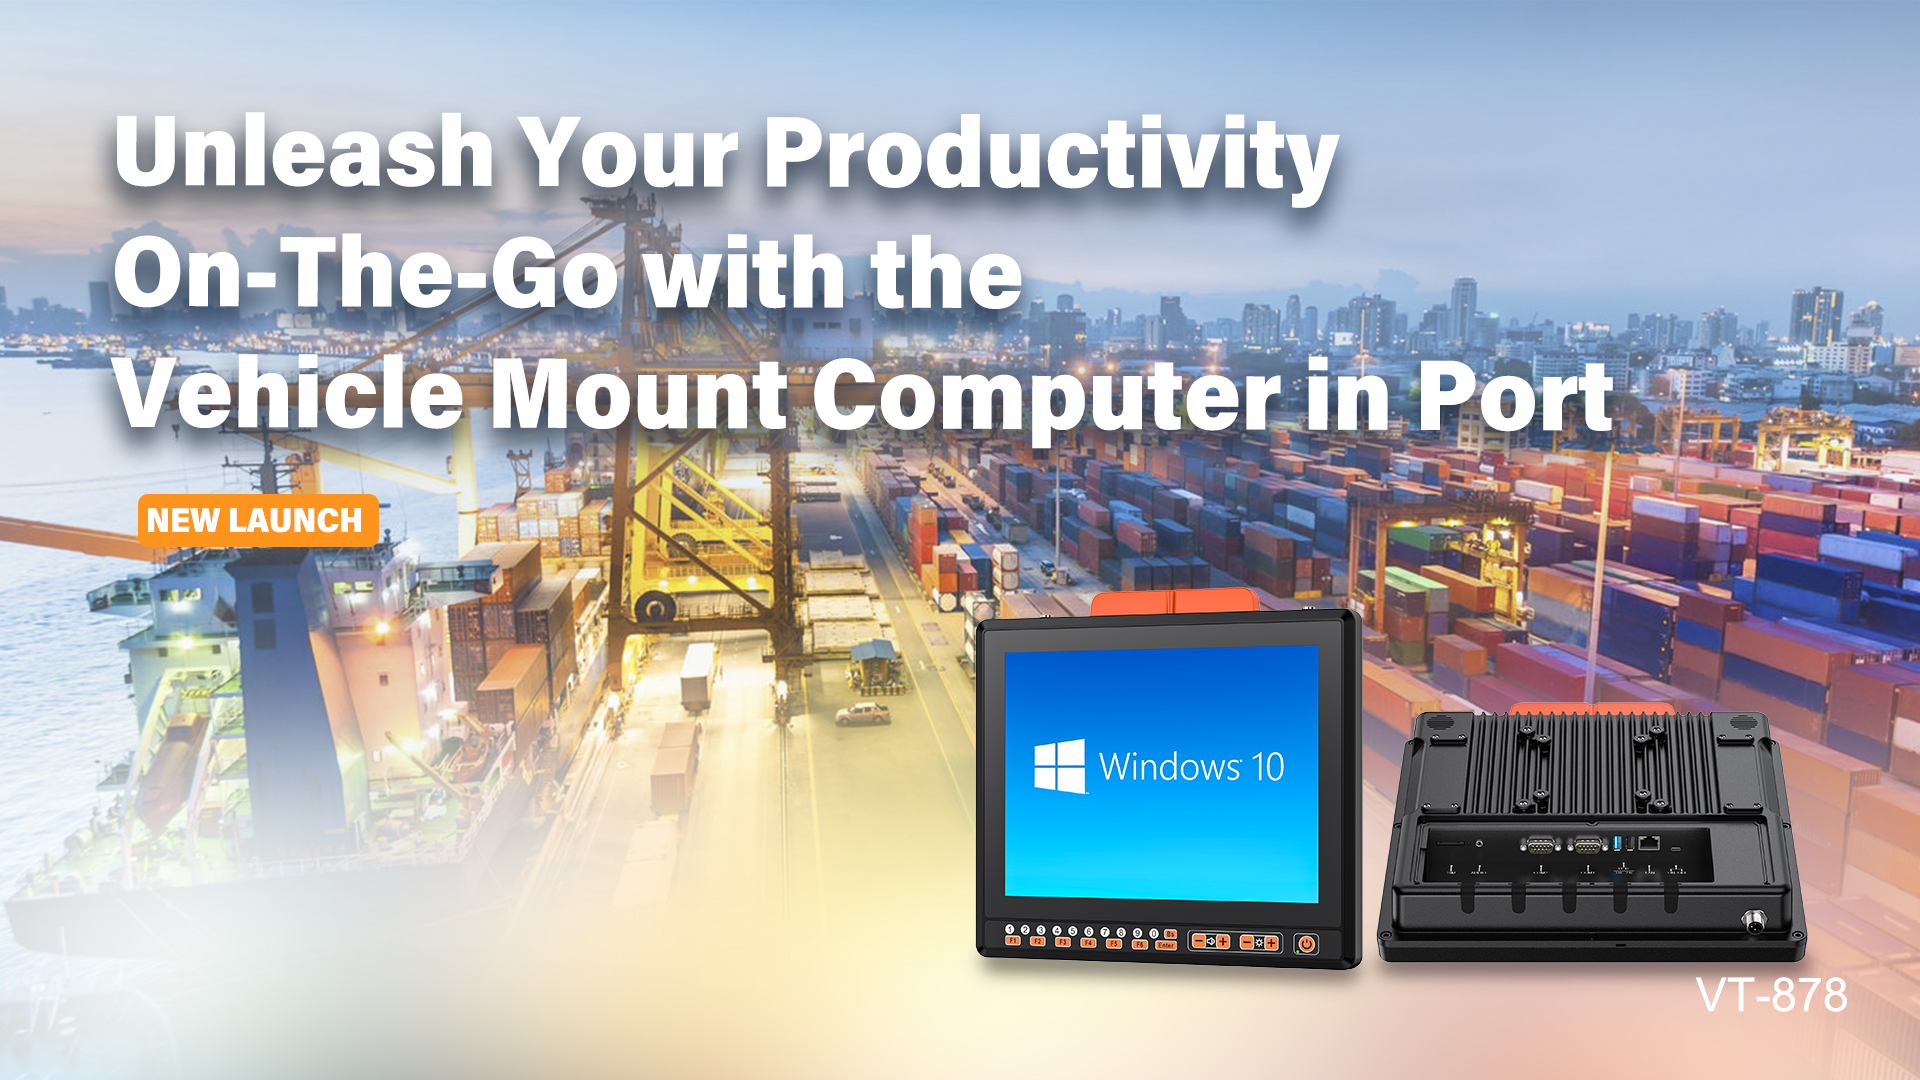 【New Arrival】Unleash Your Productivity On-The-Go with the VT-878 Vehicle Mount Computer in Port